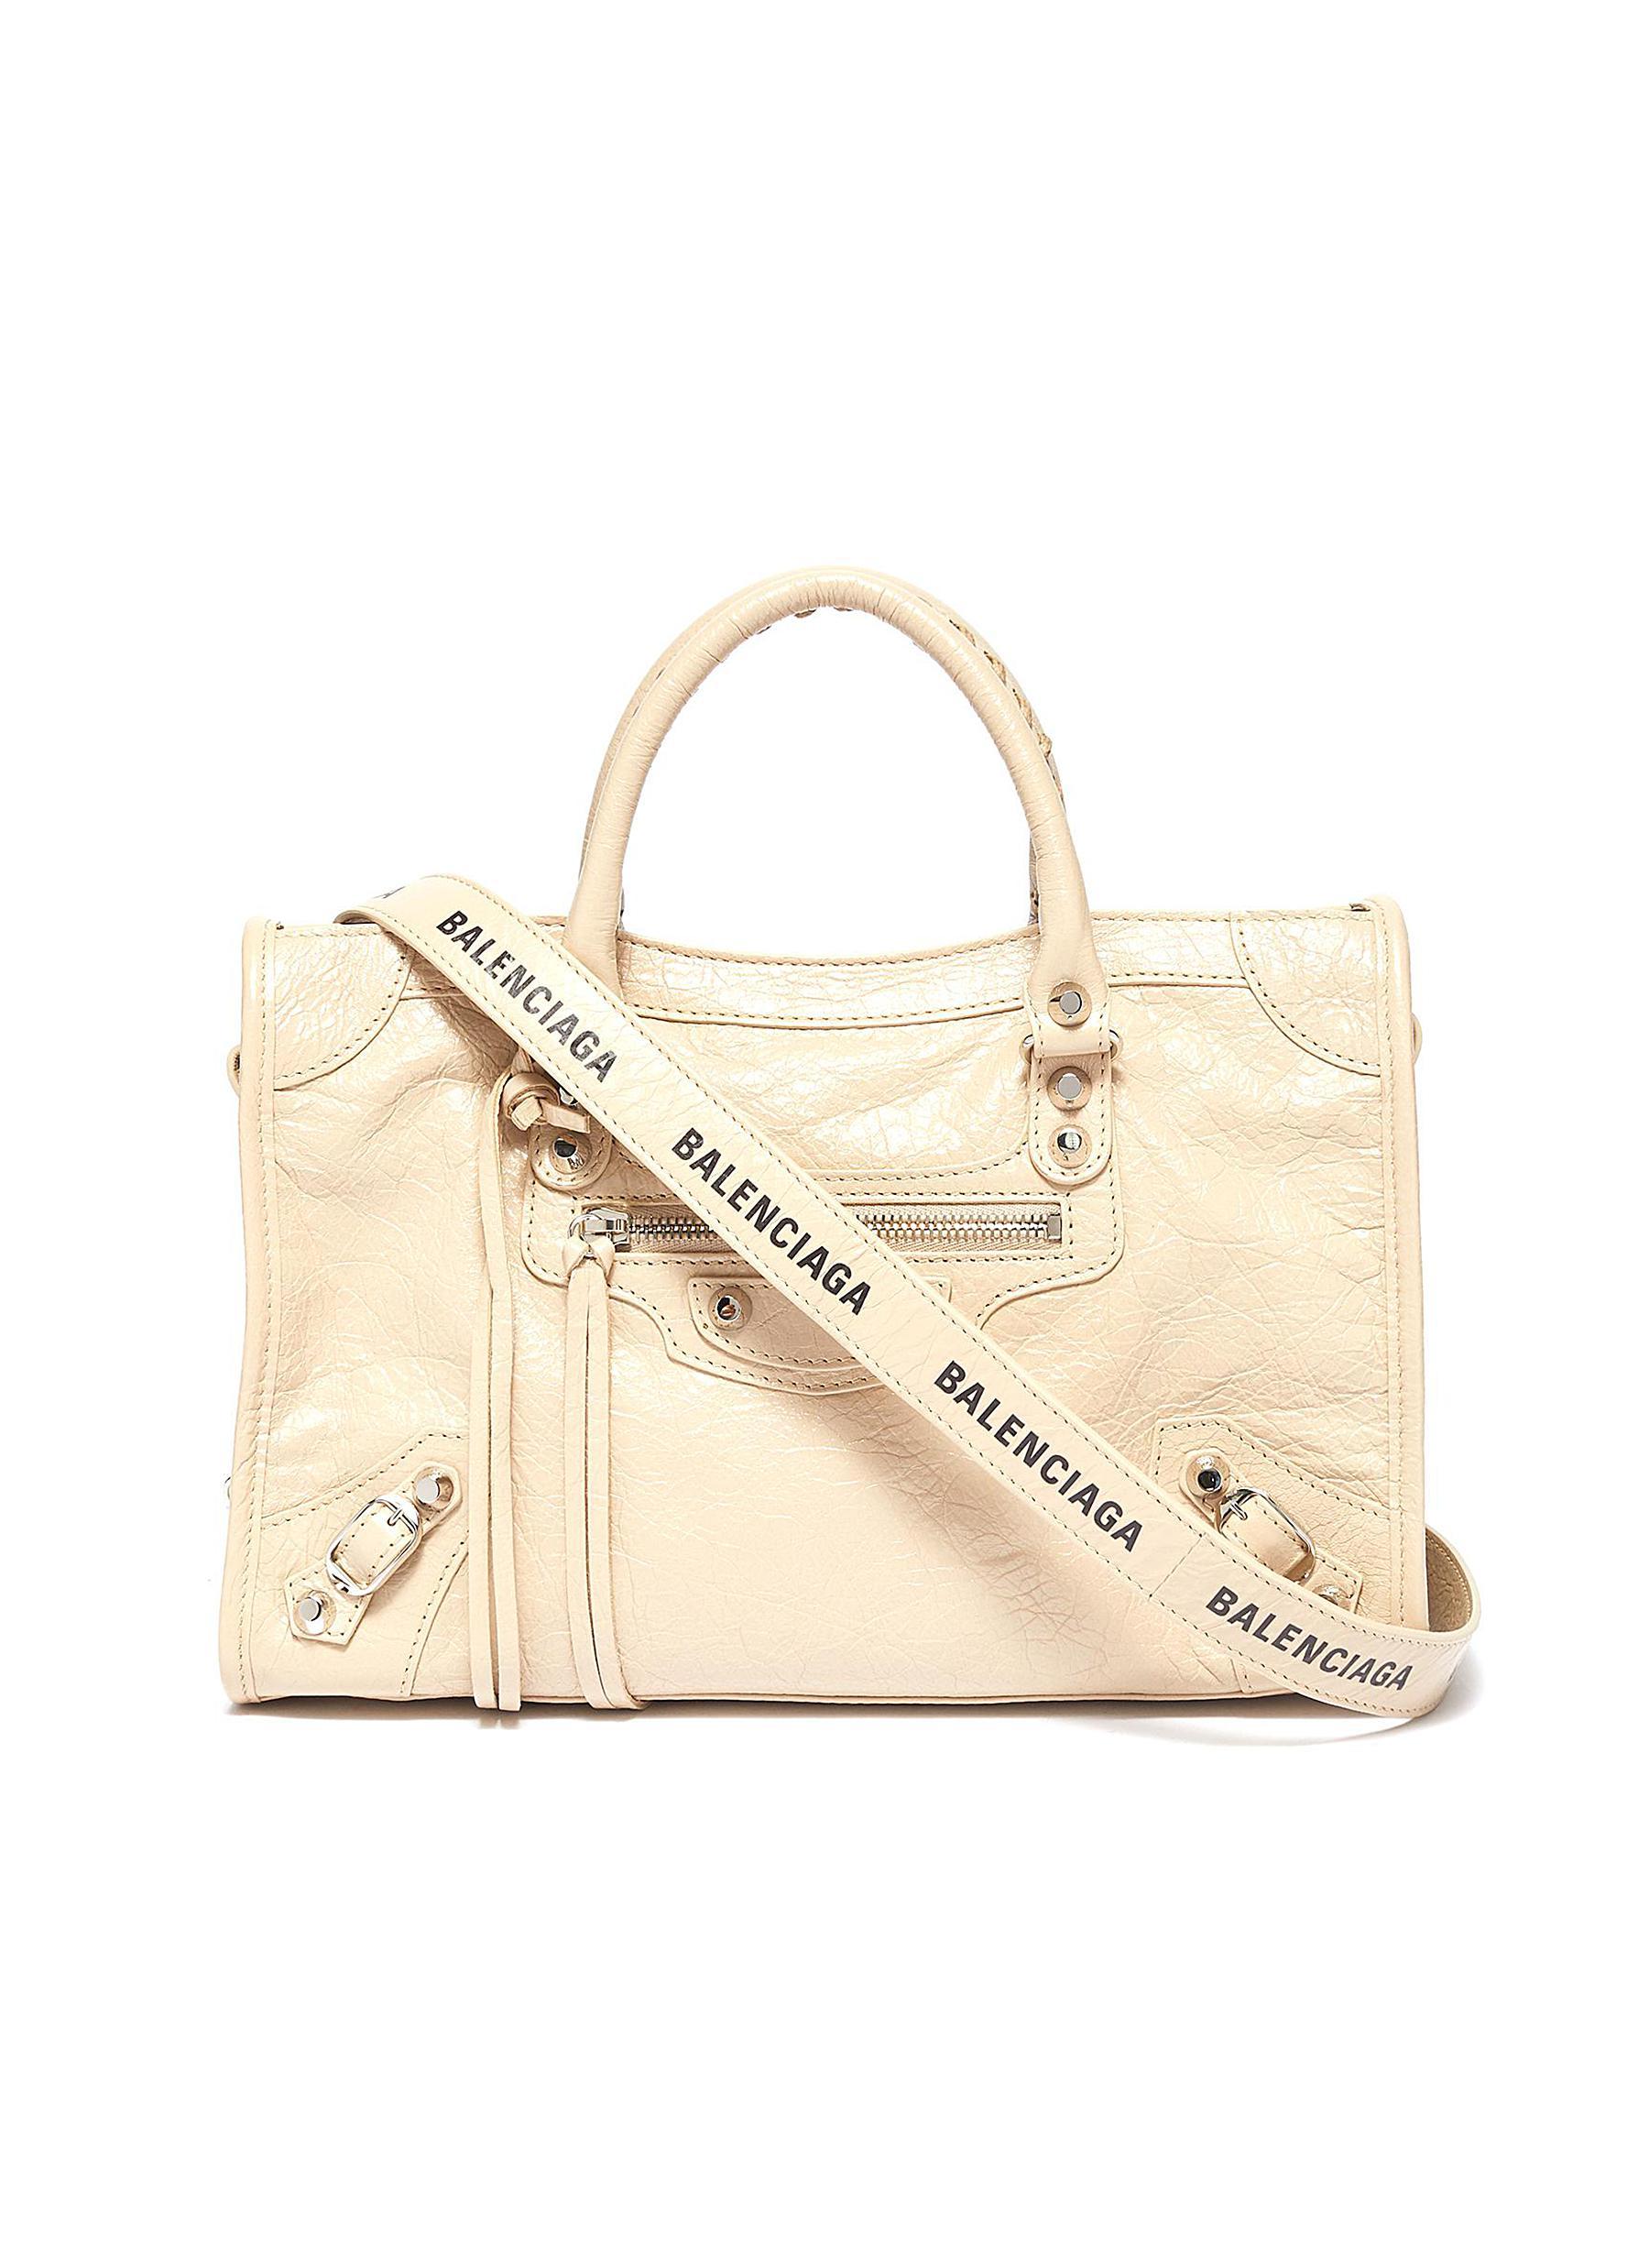 Balenciaga 'classic City' Logo Strap Small Leather Shoulder Bag in Natural  | Lyst